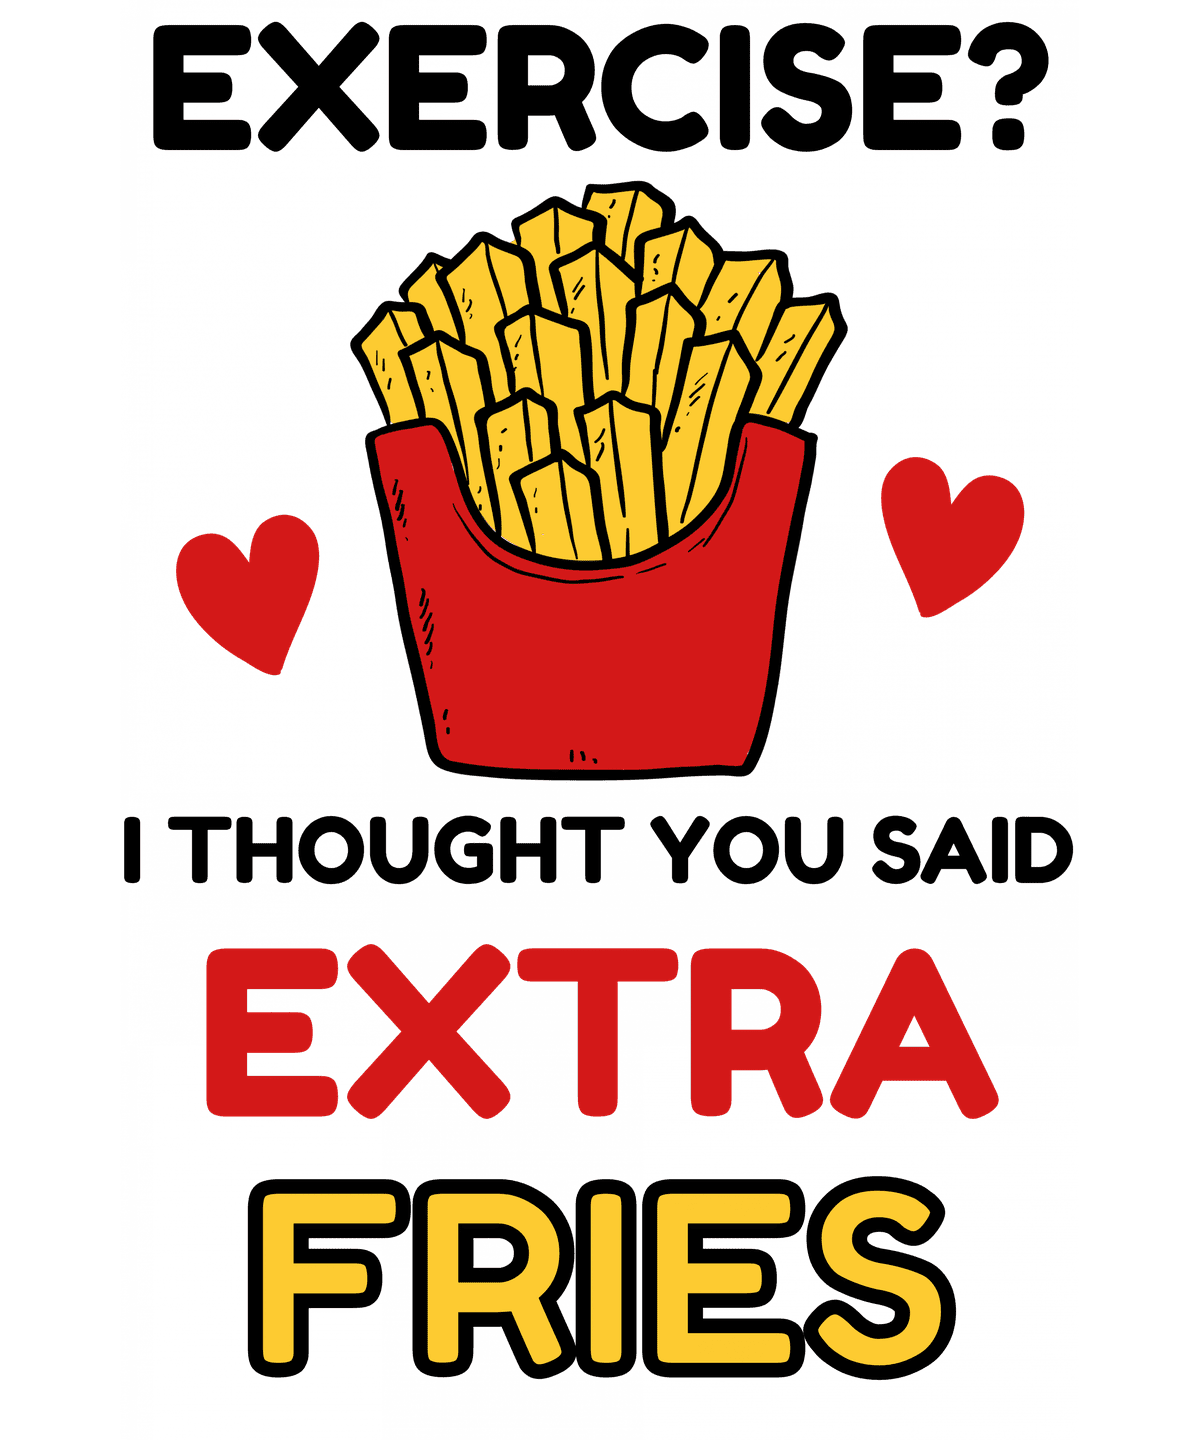 EXERCISE_EXTRA_FRIES